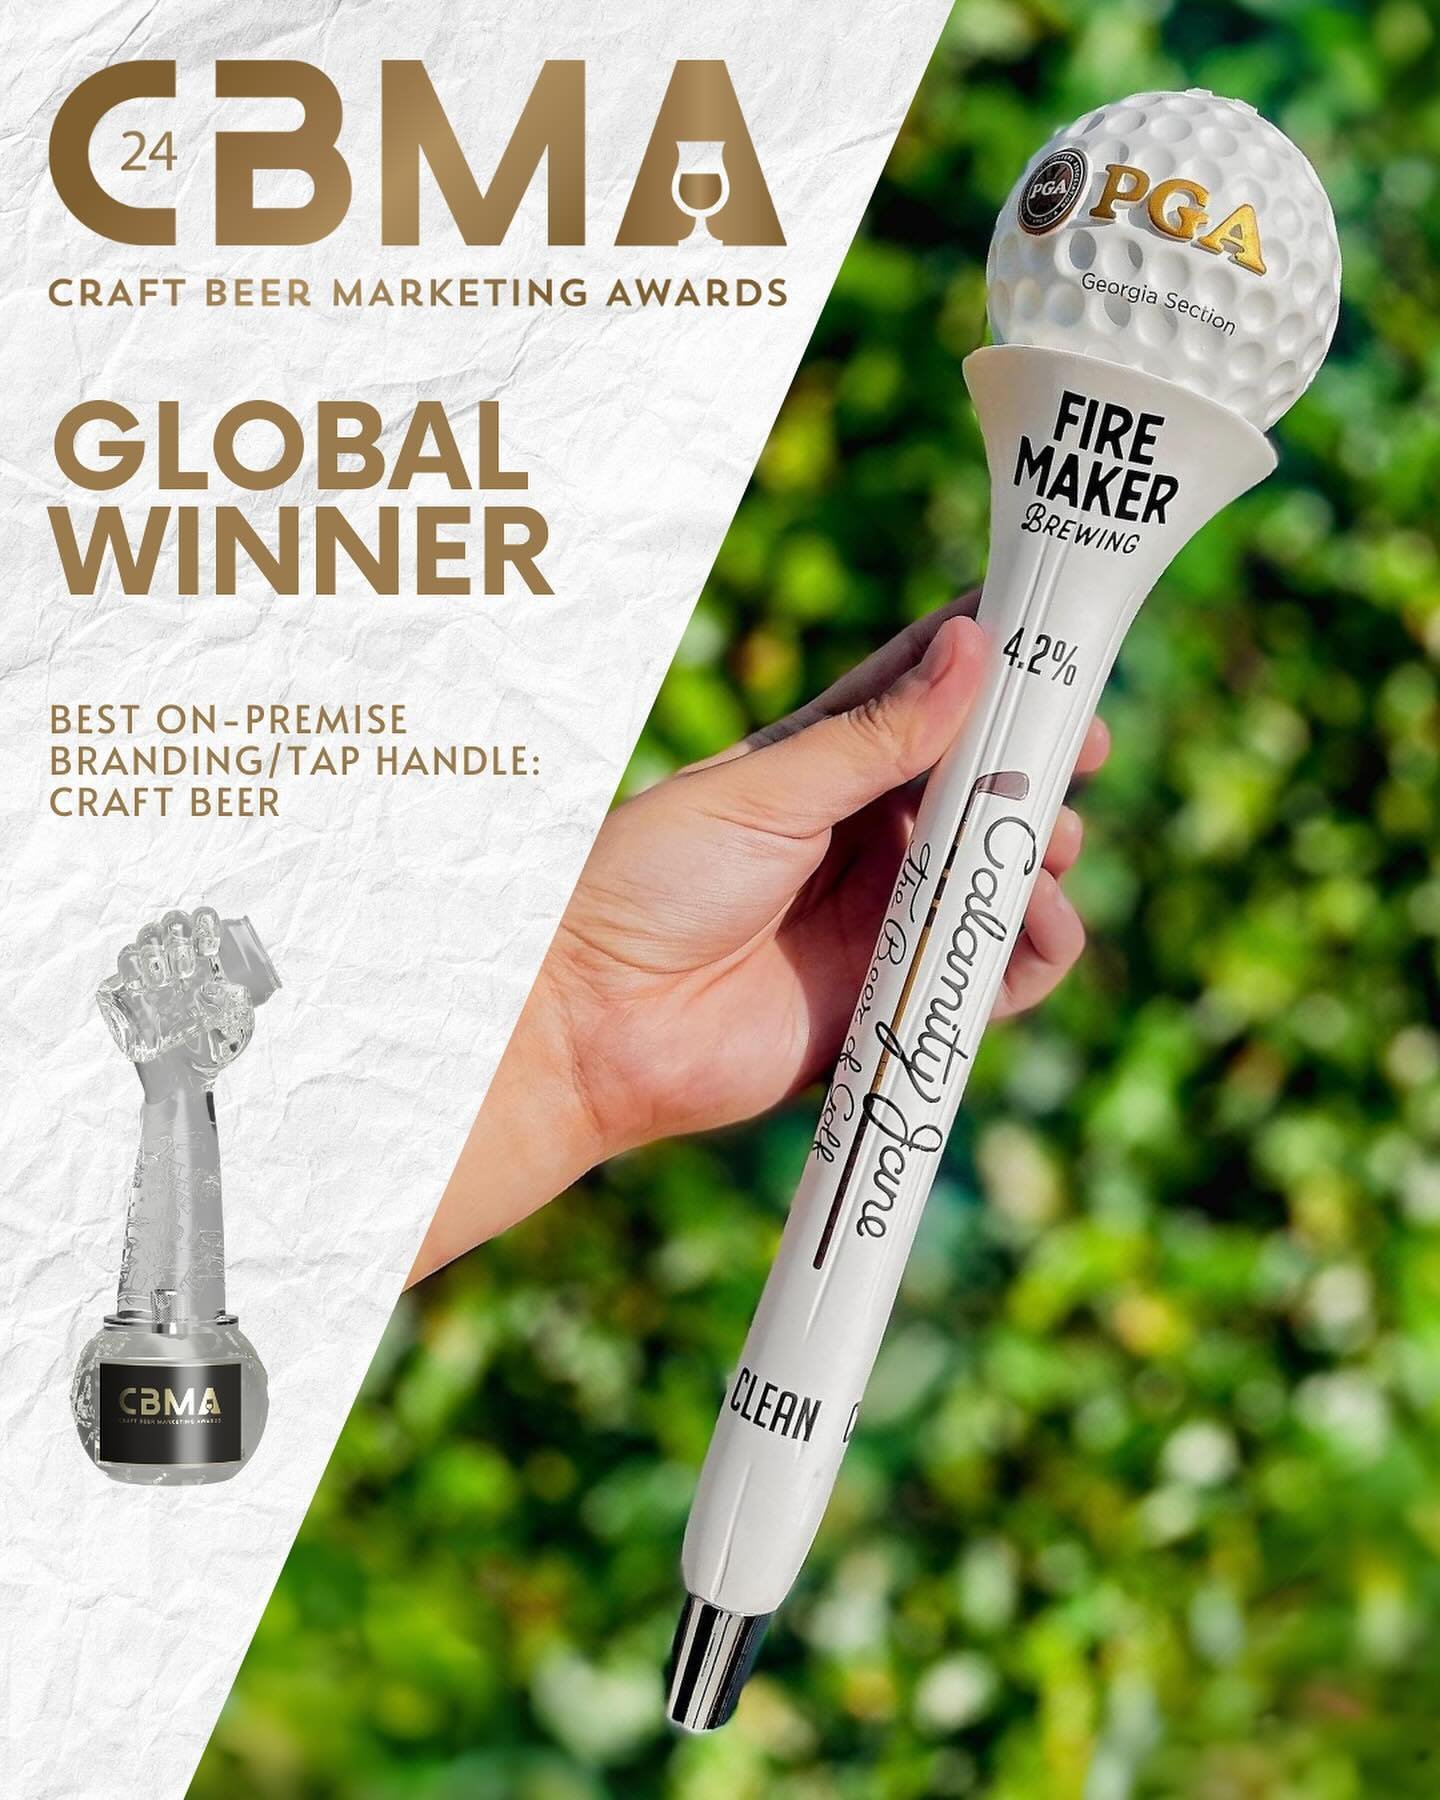 TRIPLE WHAMMY! 🏆🍻

We were honored to snag 3 Crushie Awards at the @craftbeermarketingawards this year! 🙌🎉 

We took home our 1st GLOBAL Crushie with our Calamity Jane tap handle in partnership with the @georgiapga for Best On-Premise Branding/Ta